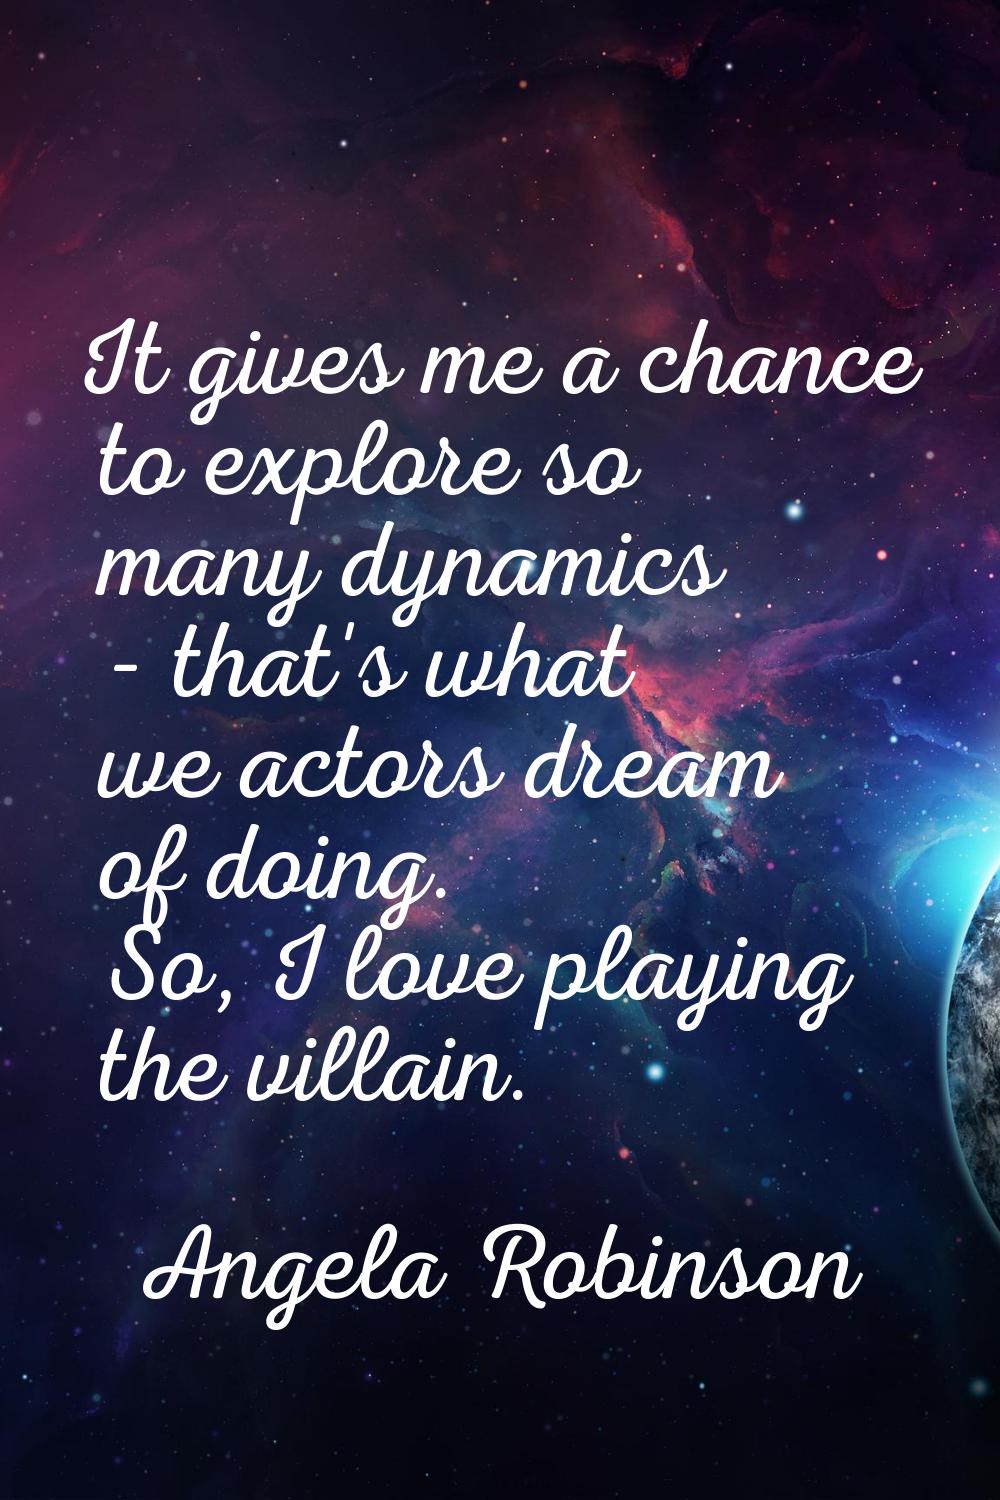 It gives me a chance to explore so many dynamics - that's what we actors dream of doing. So, I love